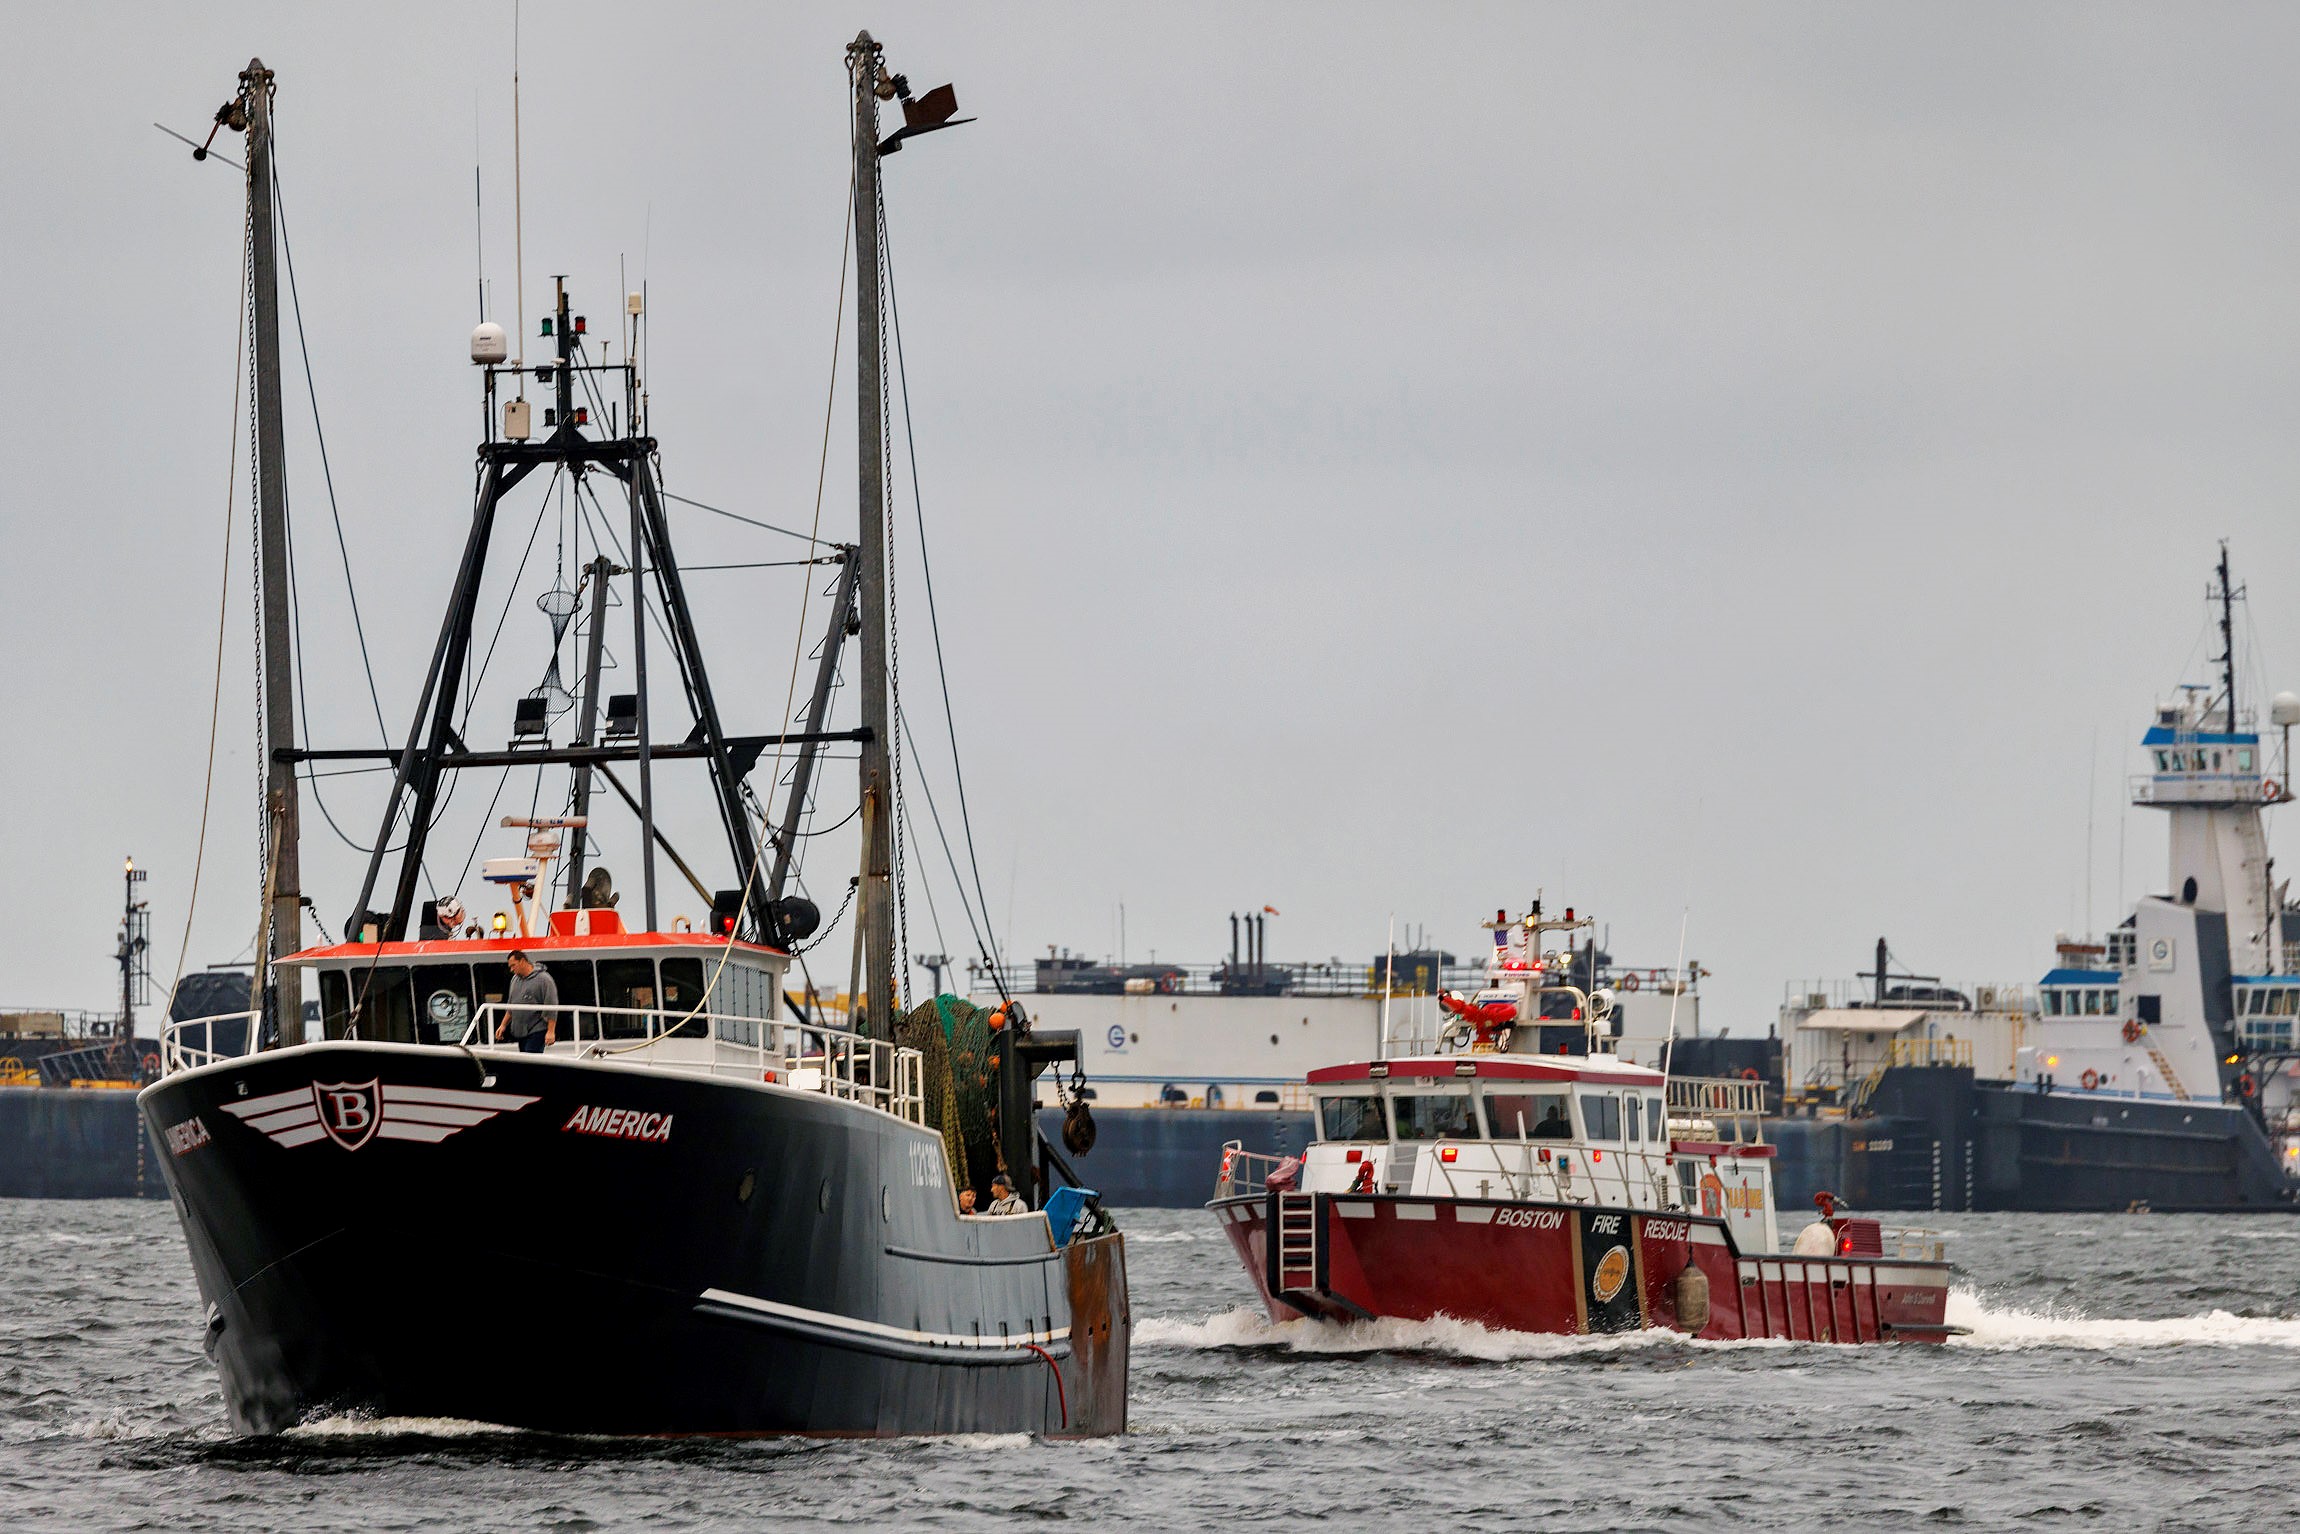 The fishing vessel America bringing a man who crew said they happened upon in the ocean to land in Boston on Tuesday, Sept. 26, 2023.